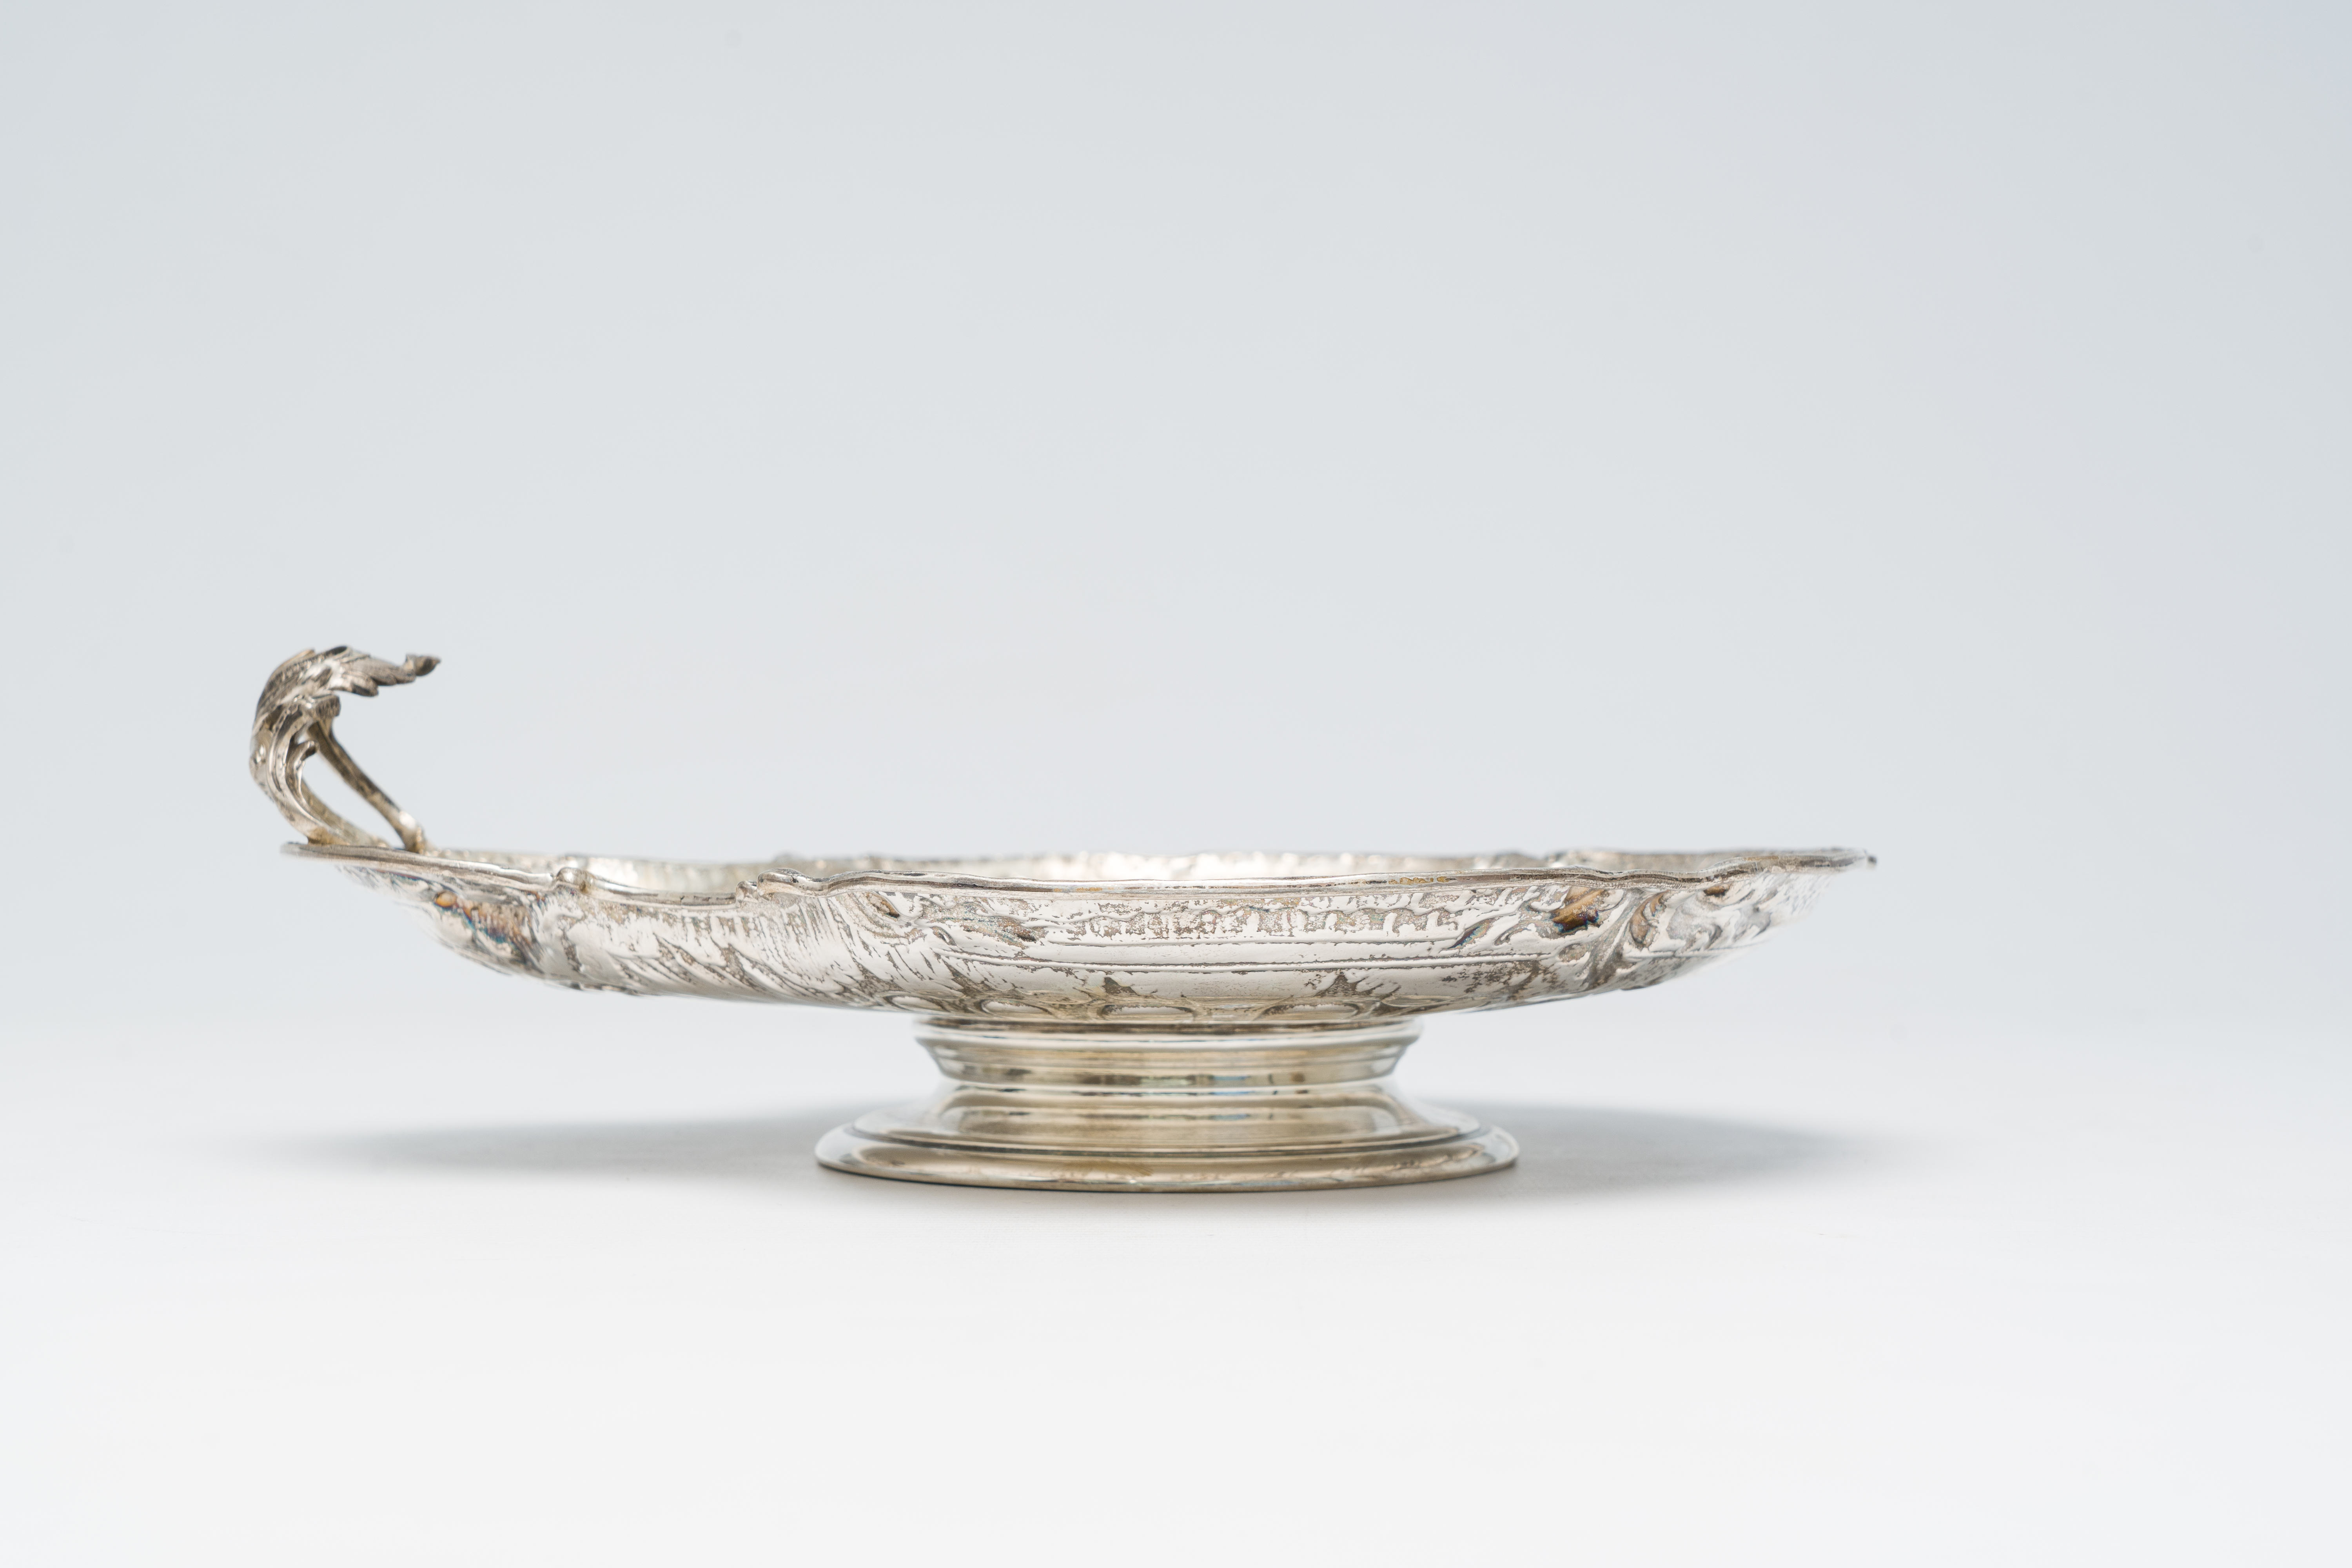 A Belgian shell-shaped silver Louis XV style dish on foot, maker's mark Wolfers, 800/000, Brussels, - Image 4 of 9